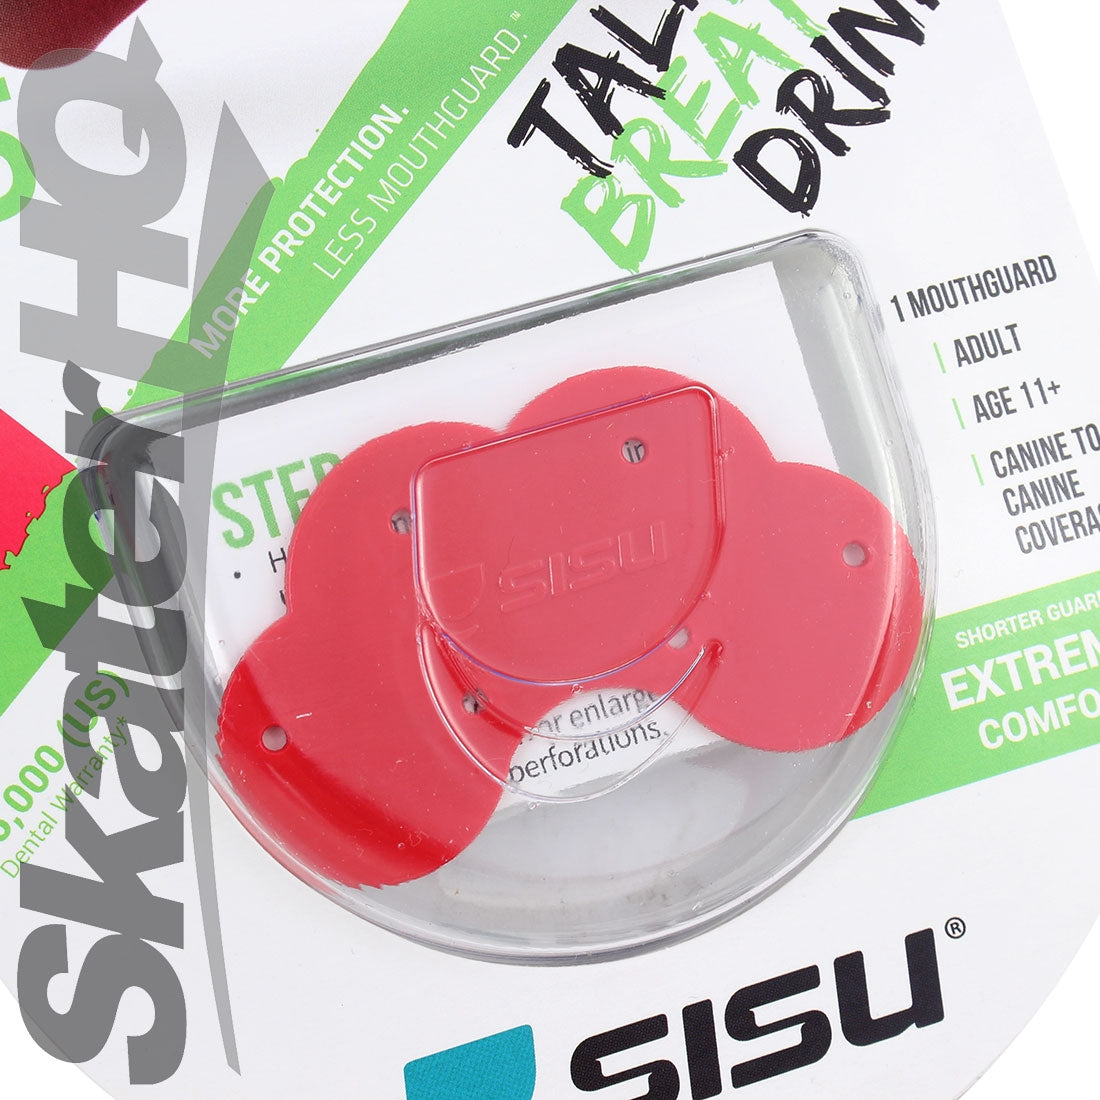 SISU GO Adult Mouthguard - Intense Red Protective Mouthguards